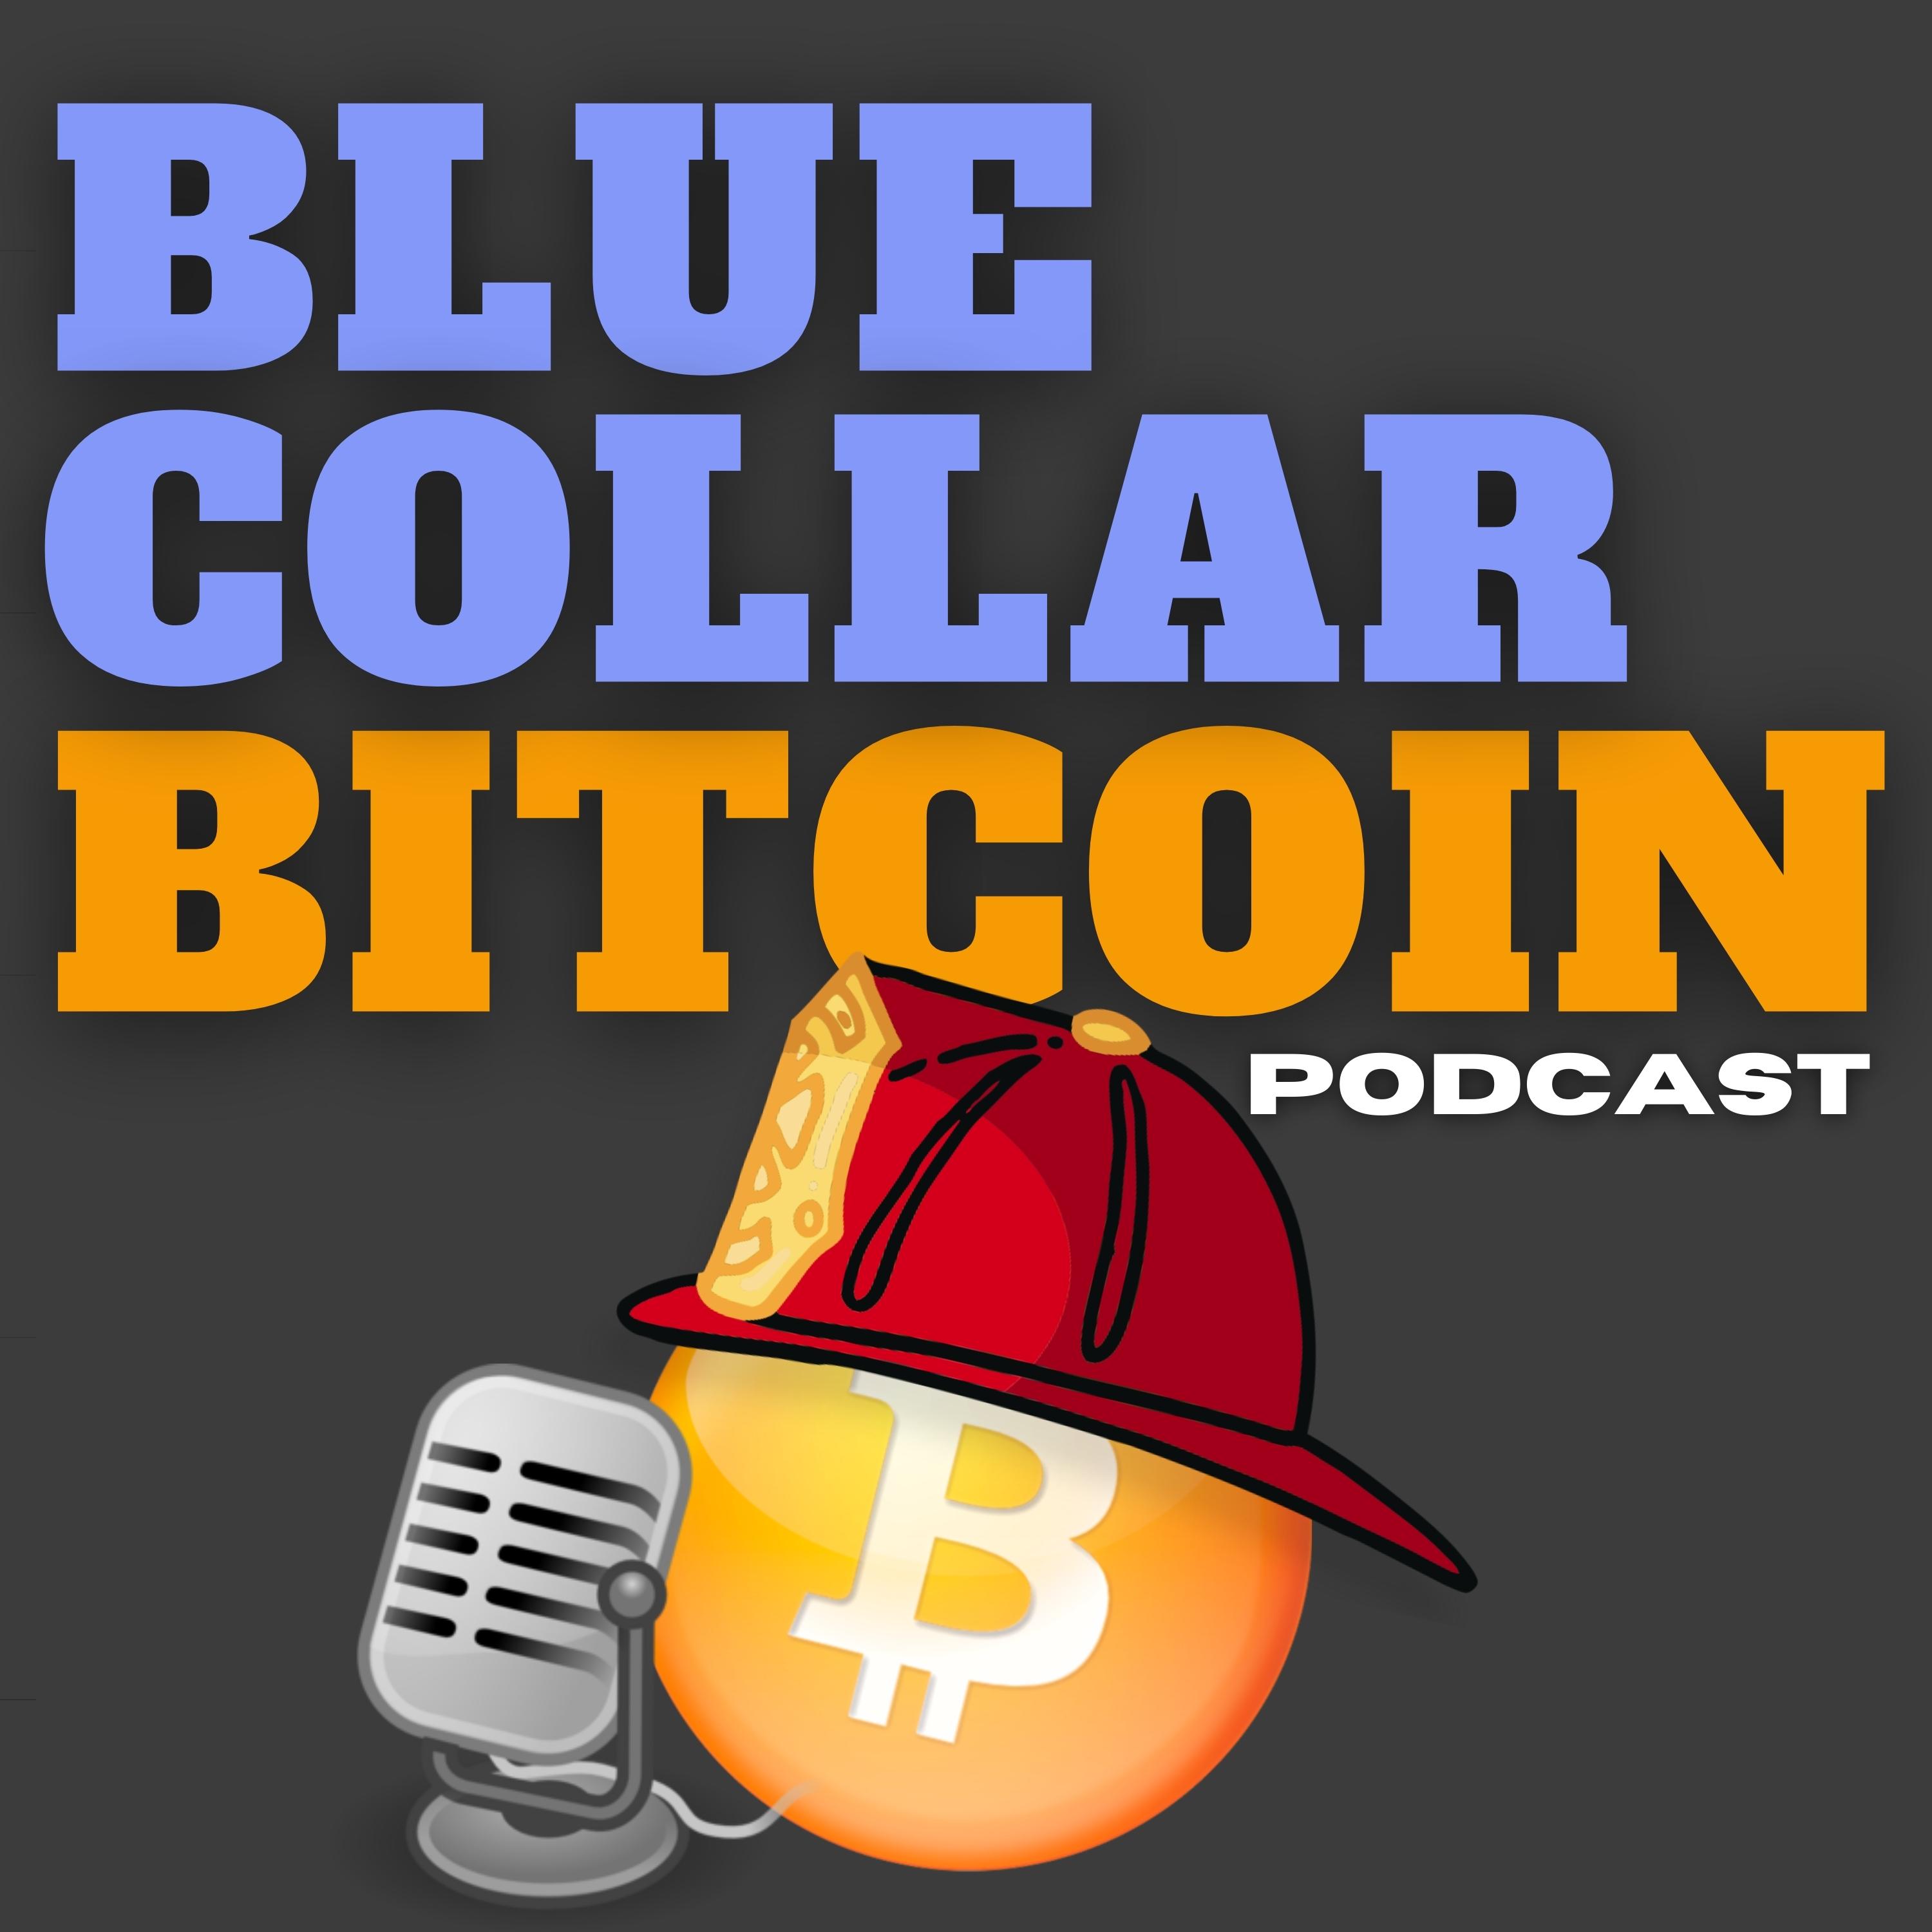 Fresh update on "three weeks ago" discussed on Blue Collar Bitcoin Podcast